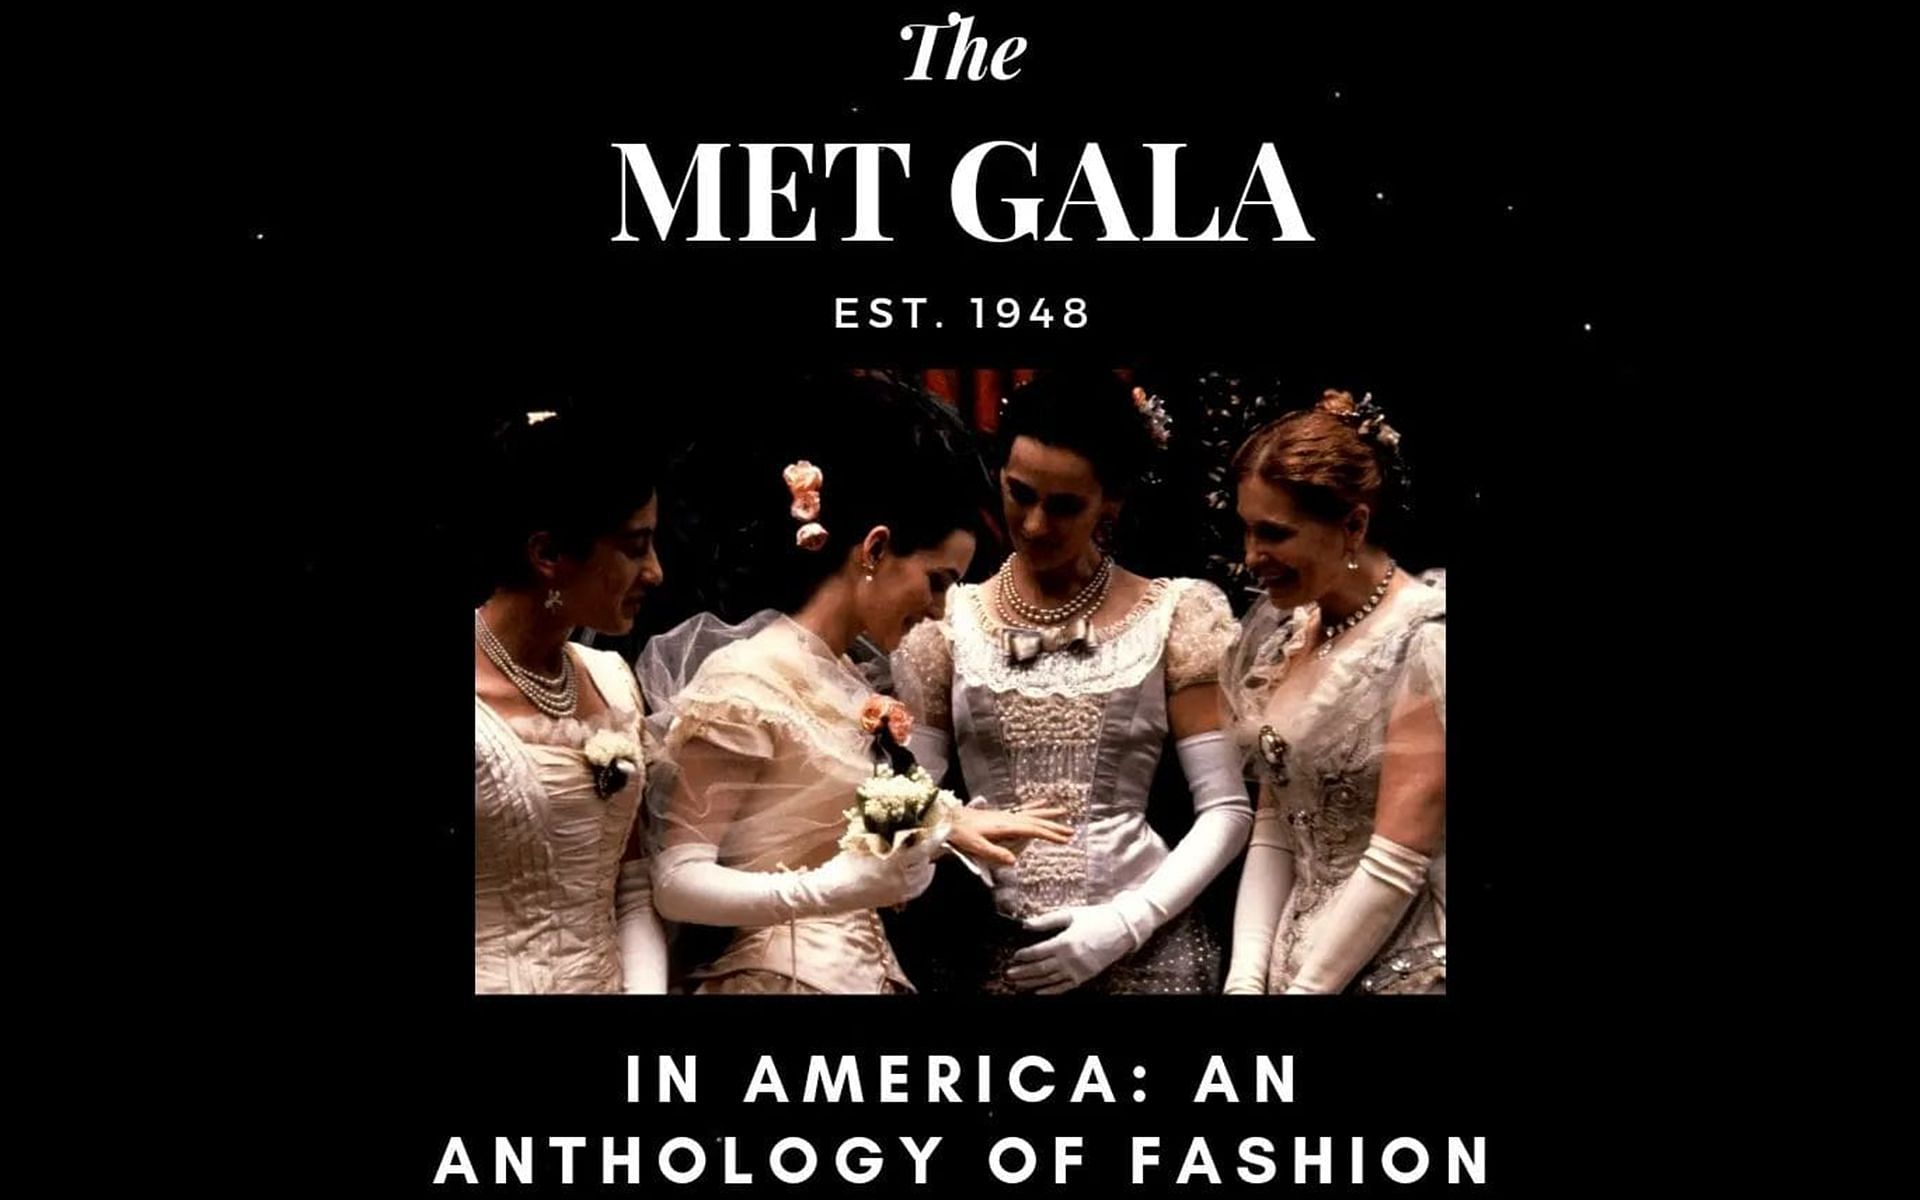 More about the Met Gala 2022 event (Image via @lettheraventalk / Instagram)